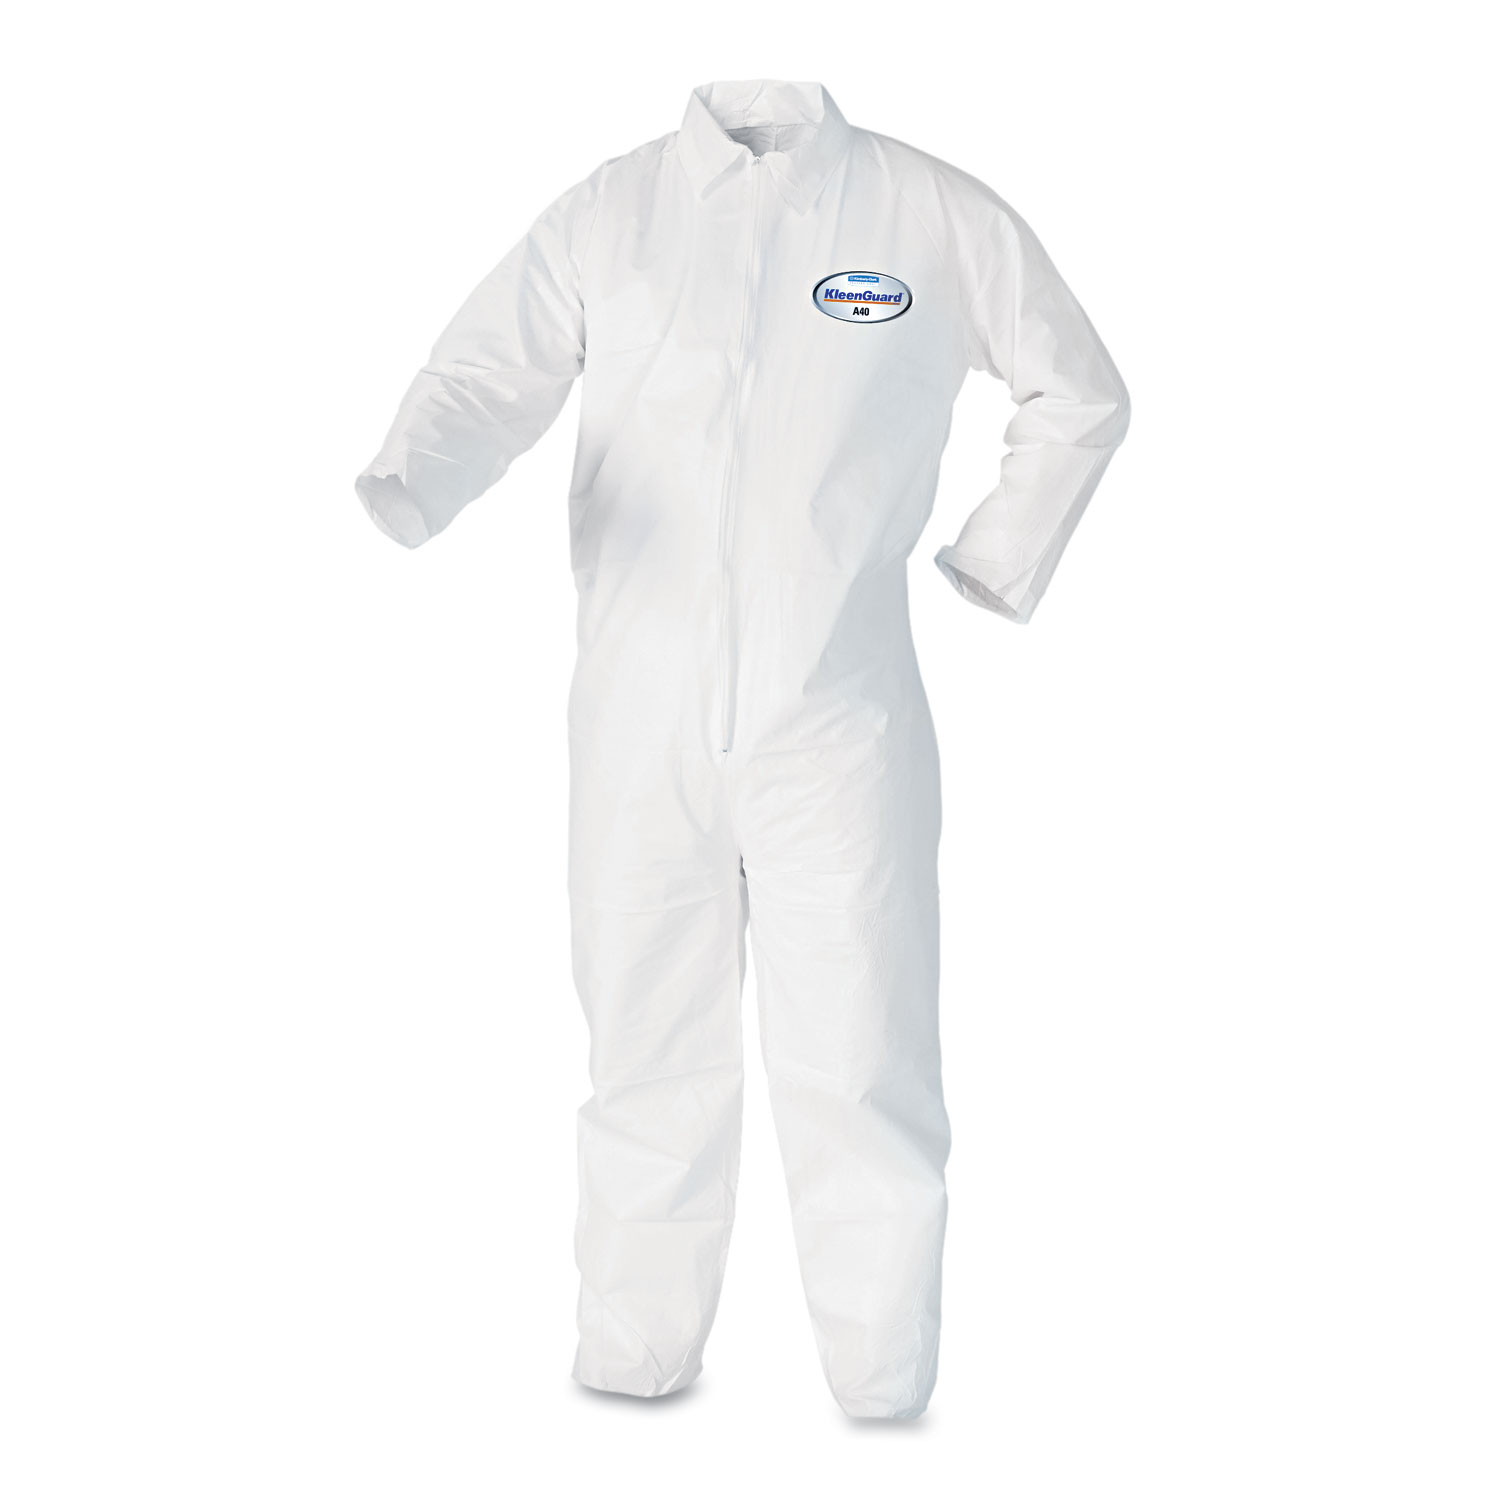 A40 Coveralls, 2X-Large, White